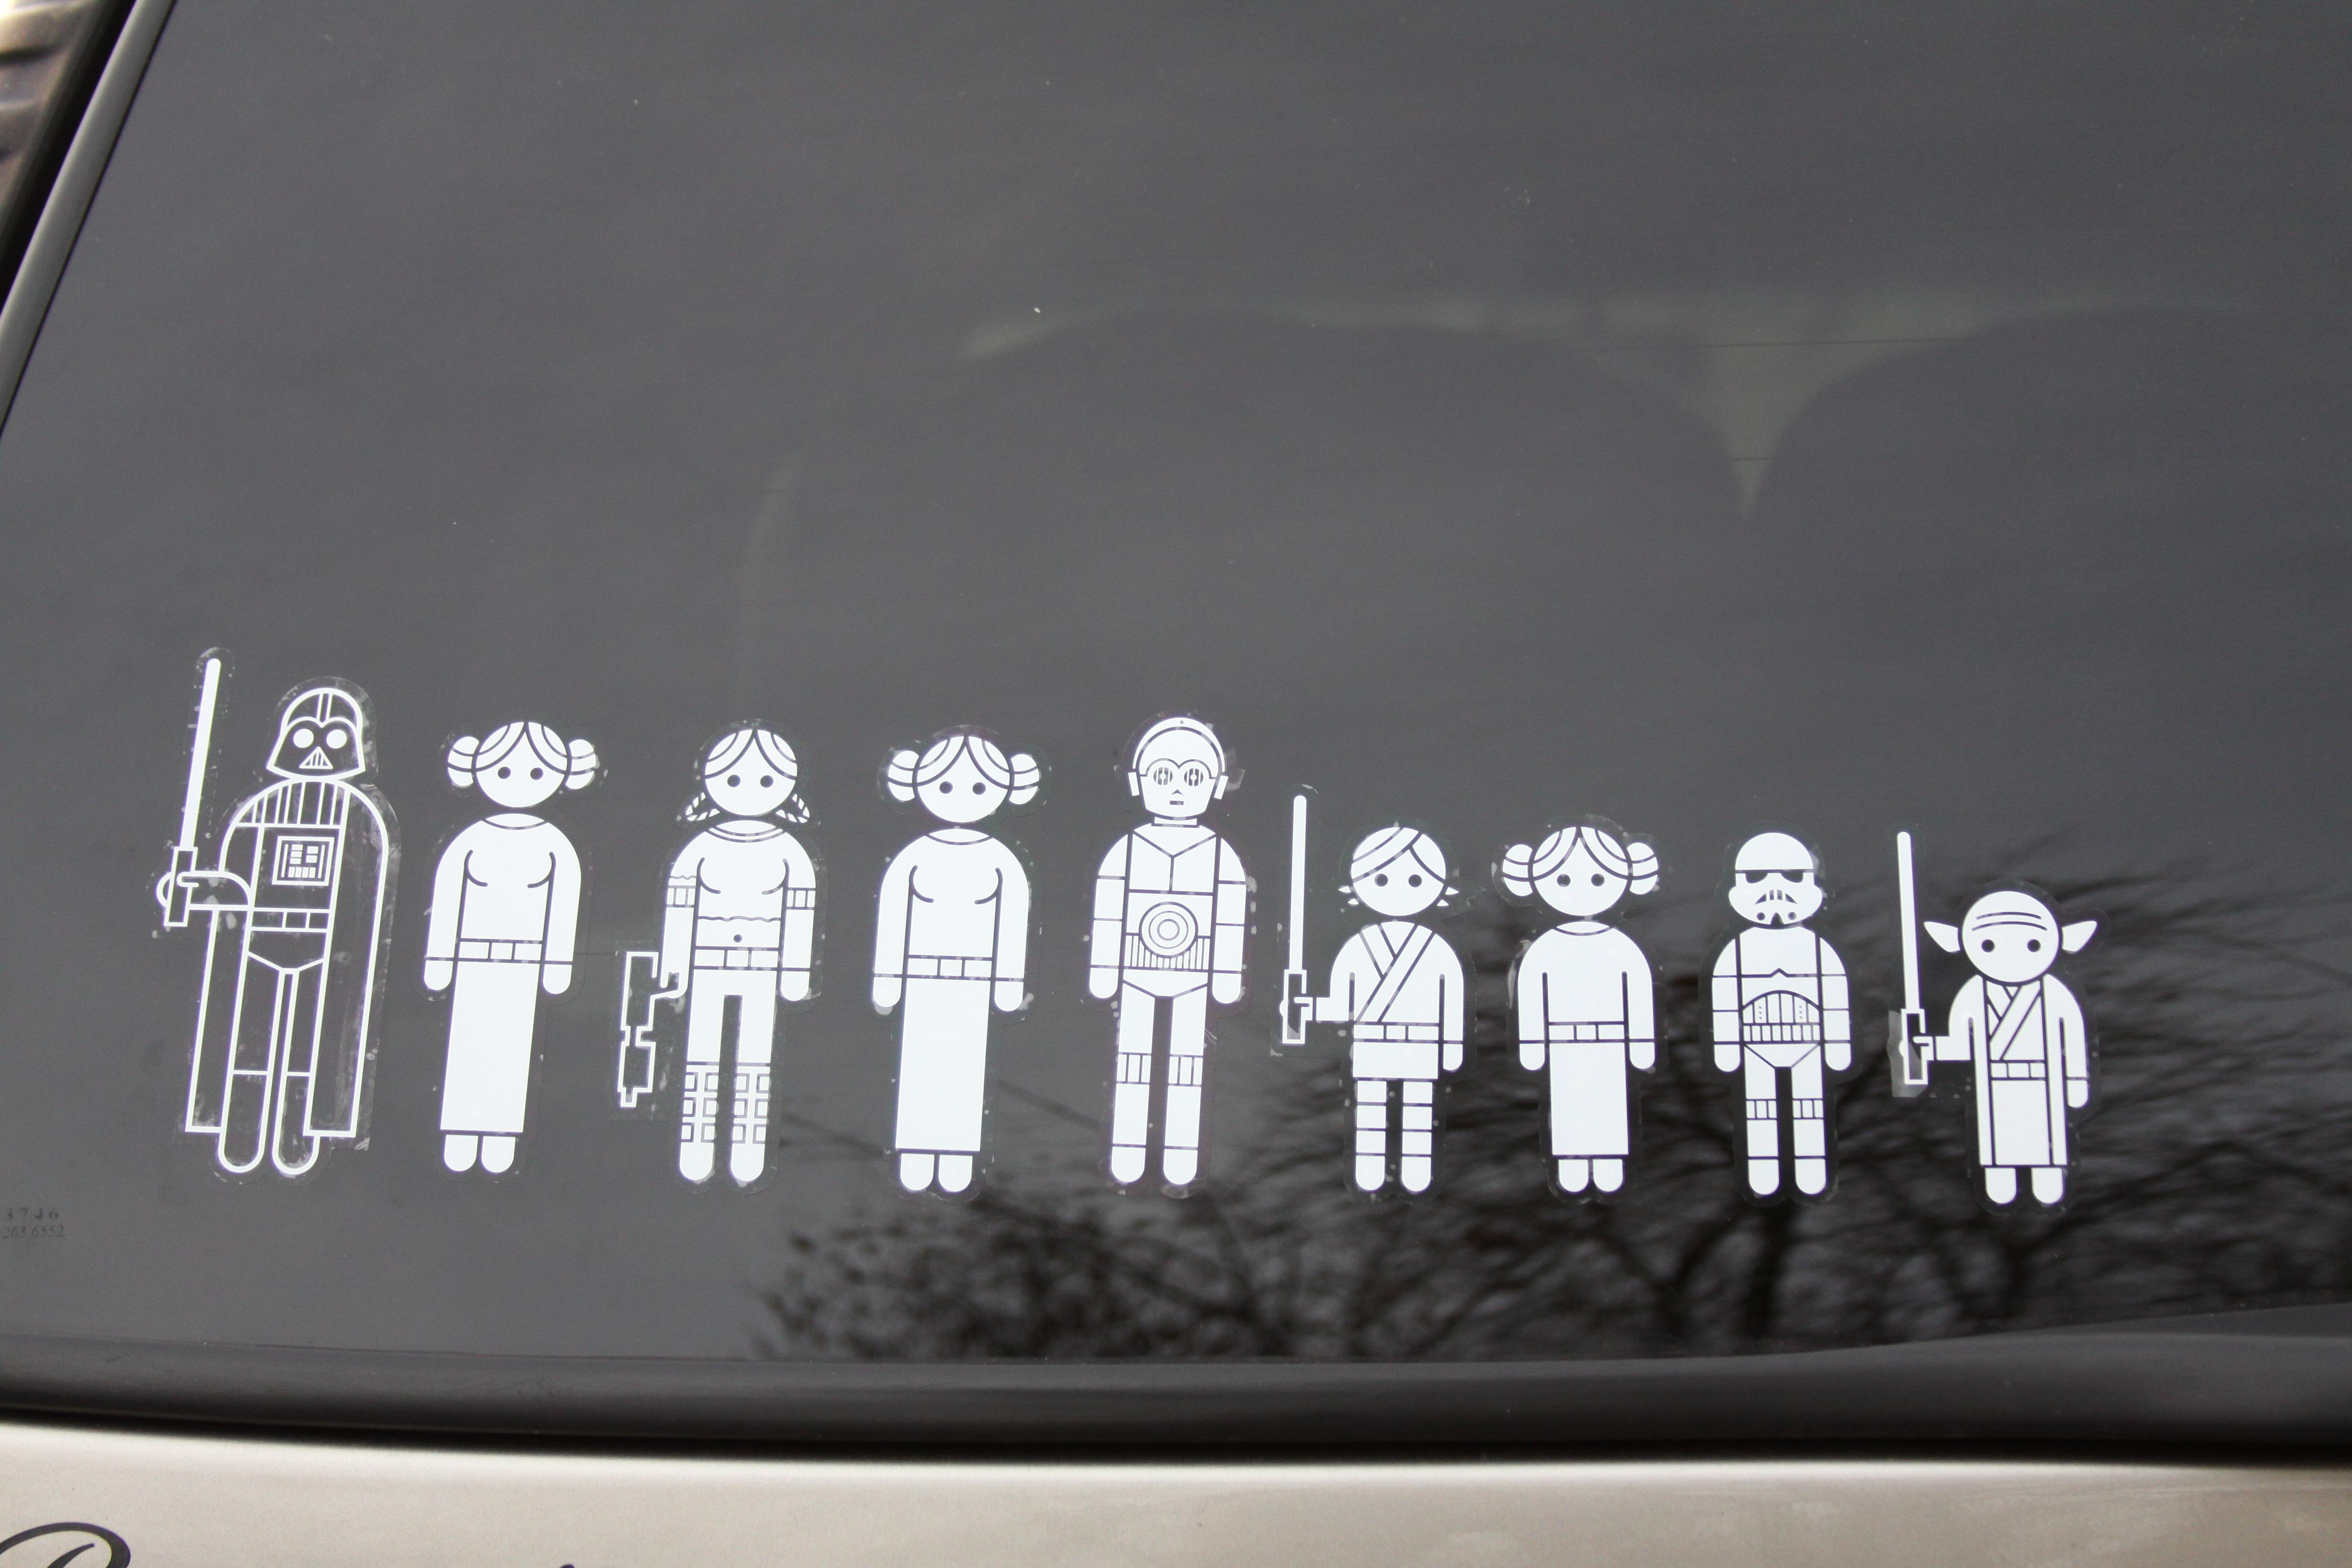 star wars family car decals